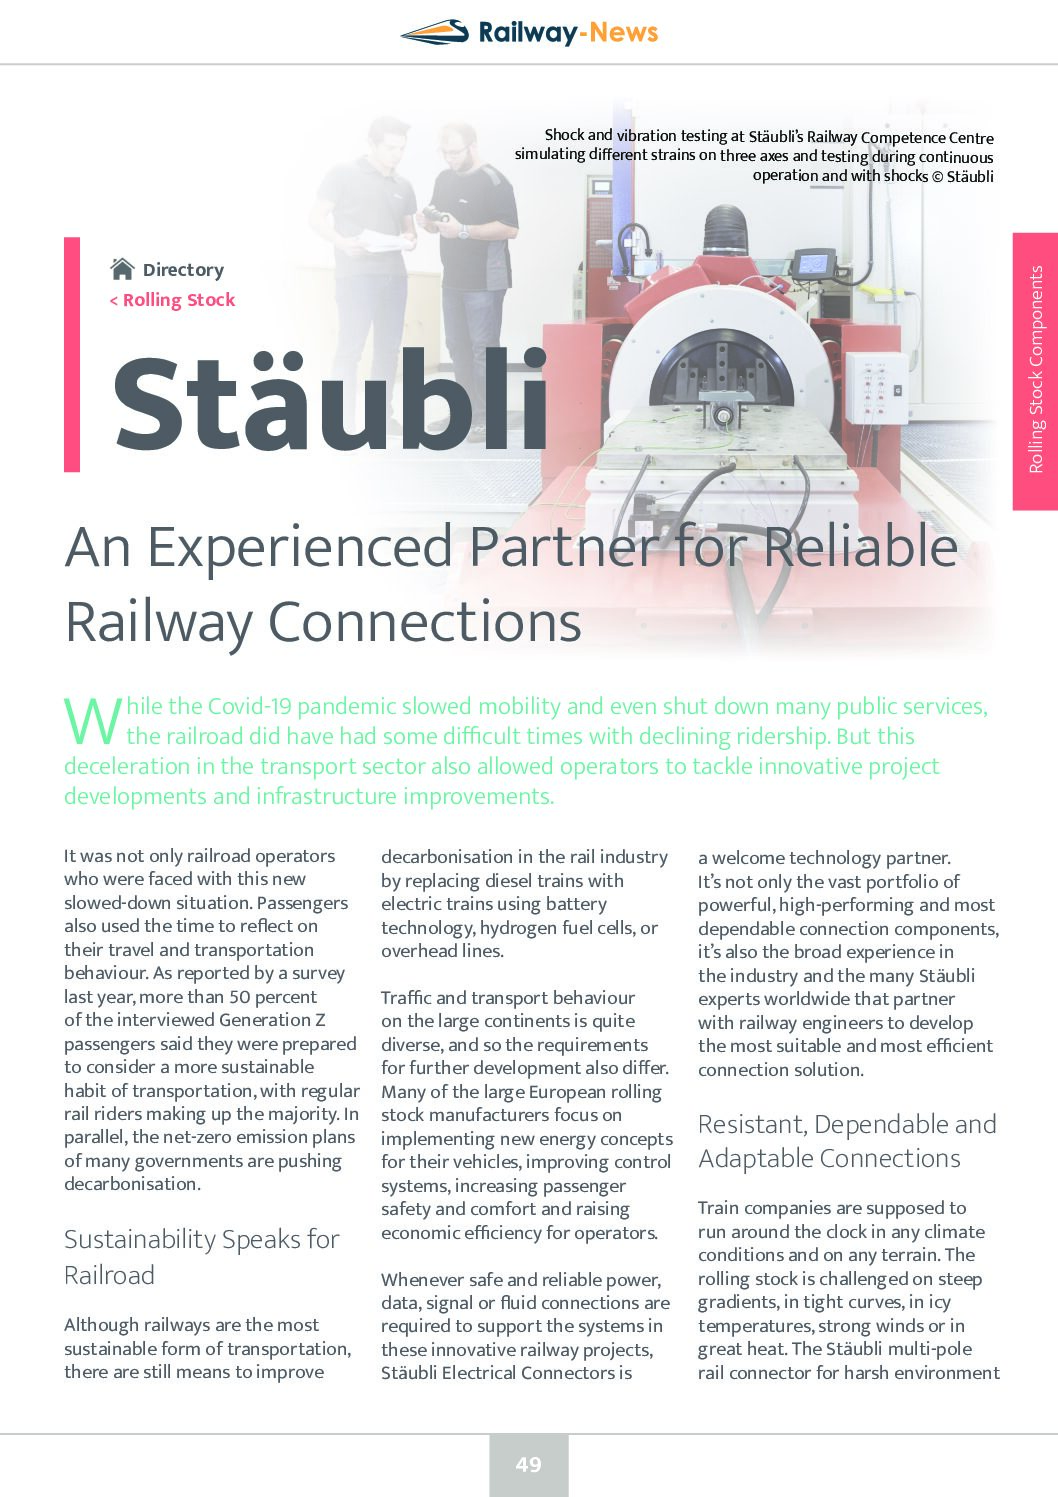 An Experienced Partner for Reliable Railway Connections